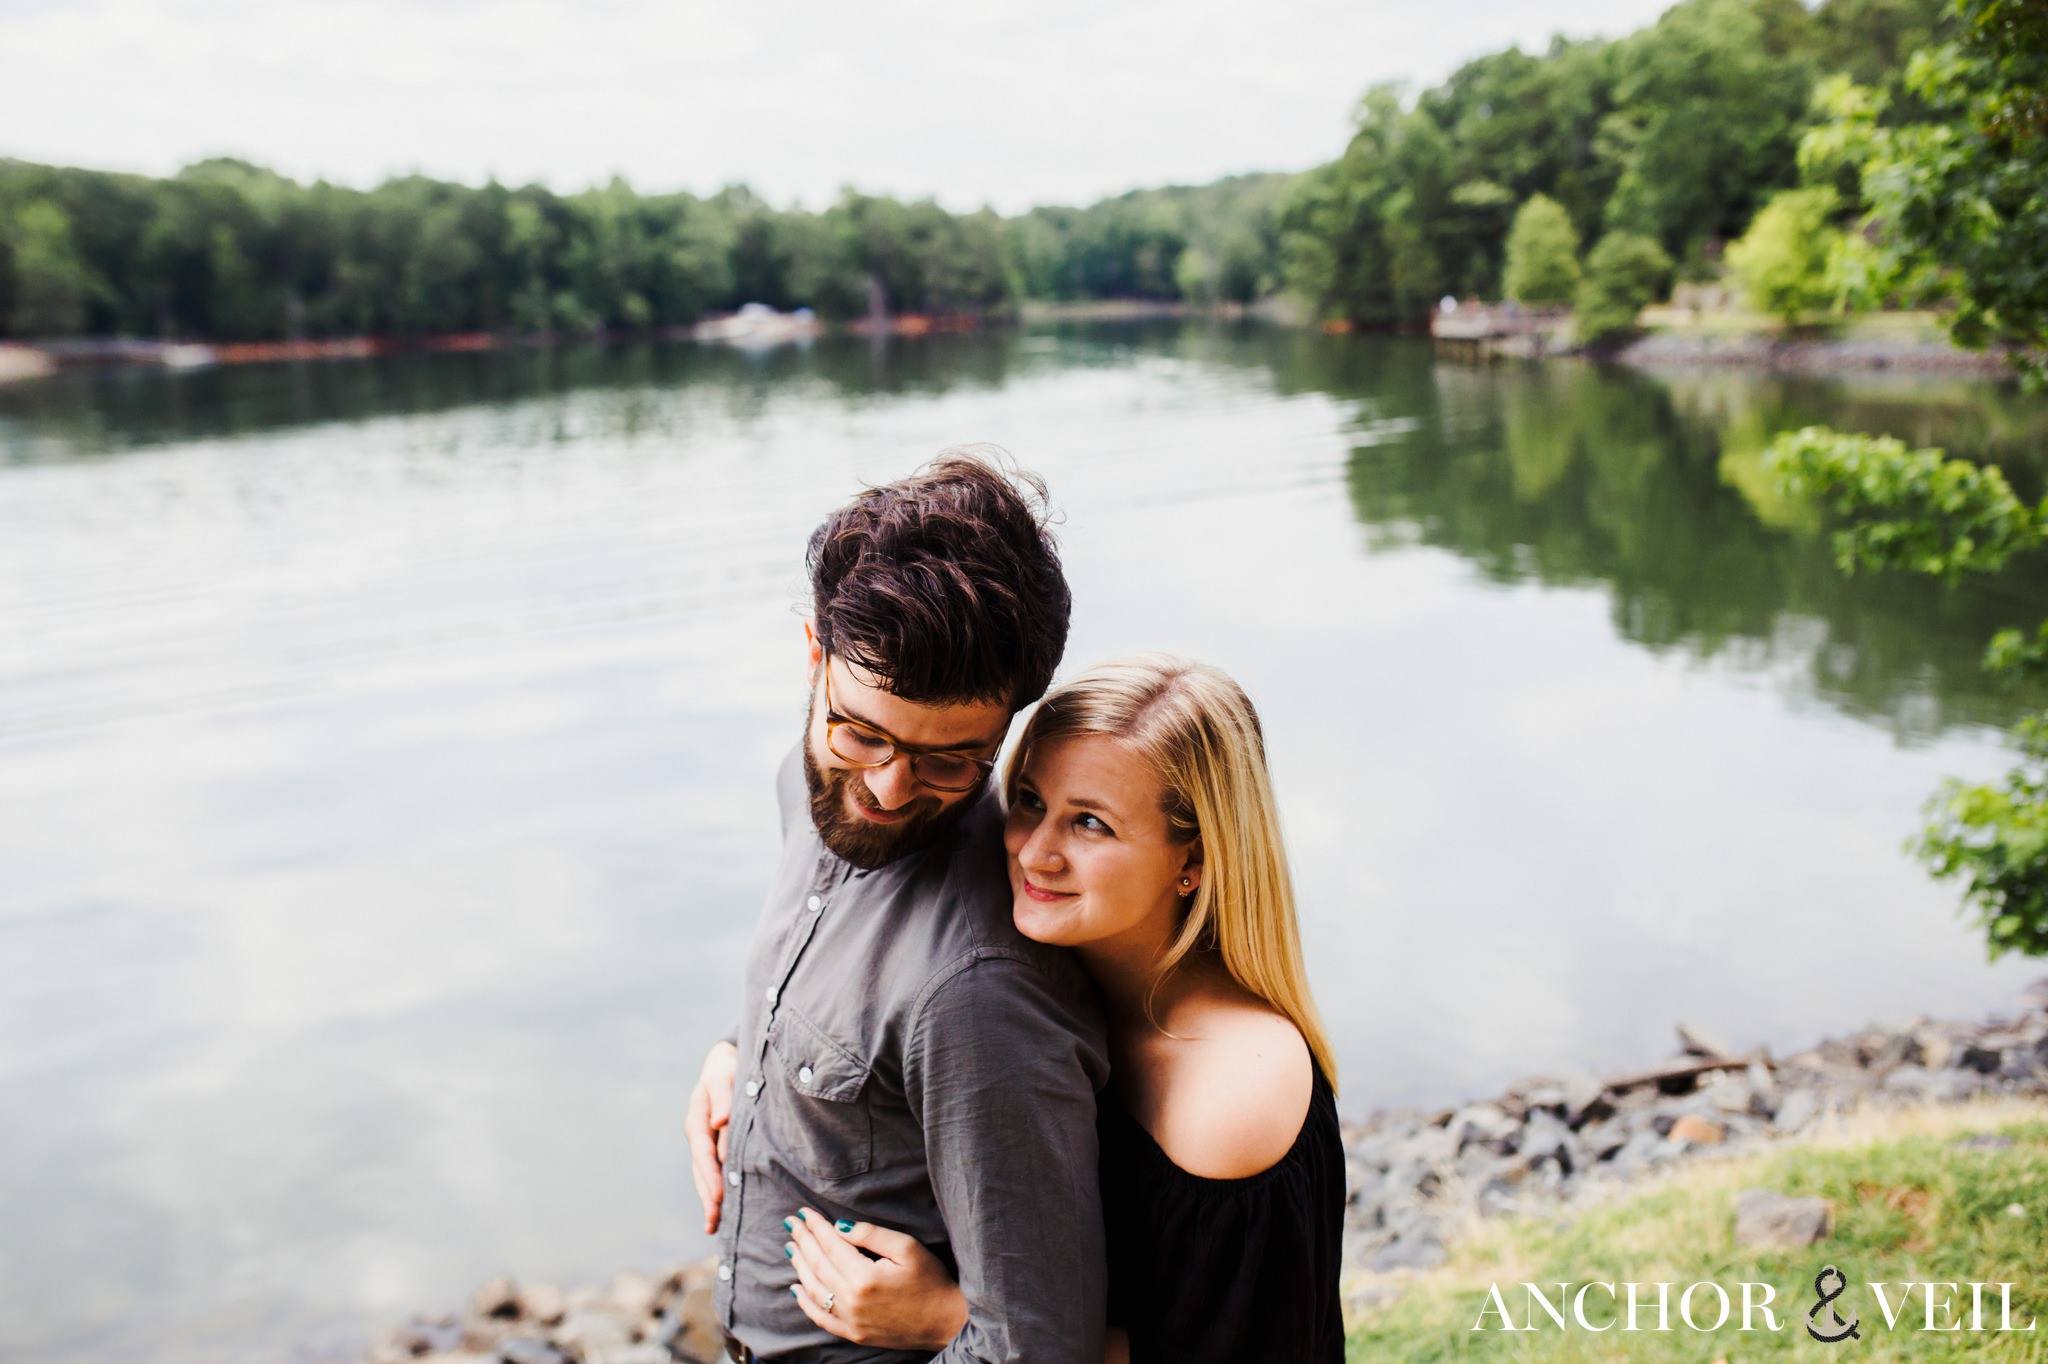 Holding him from behind near the water during their McDowell Nature Preserve Engagement Session